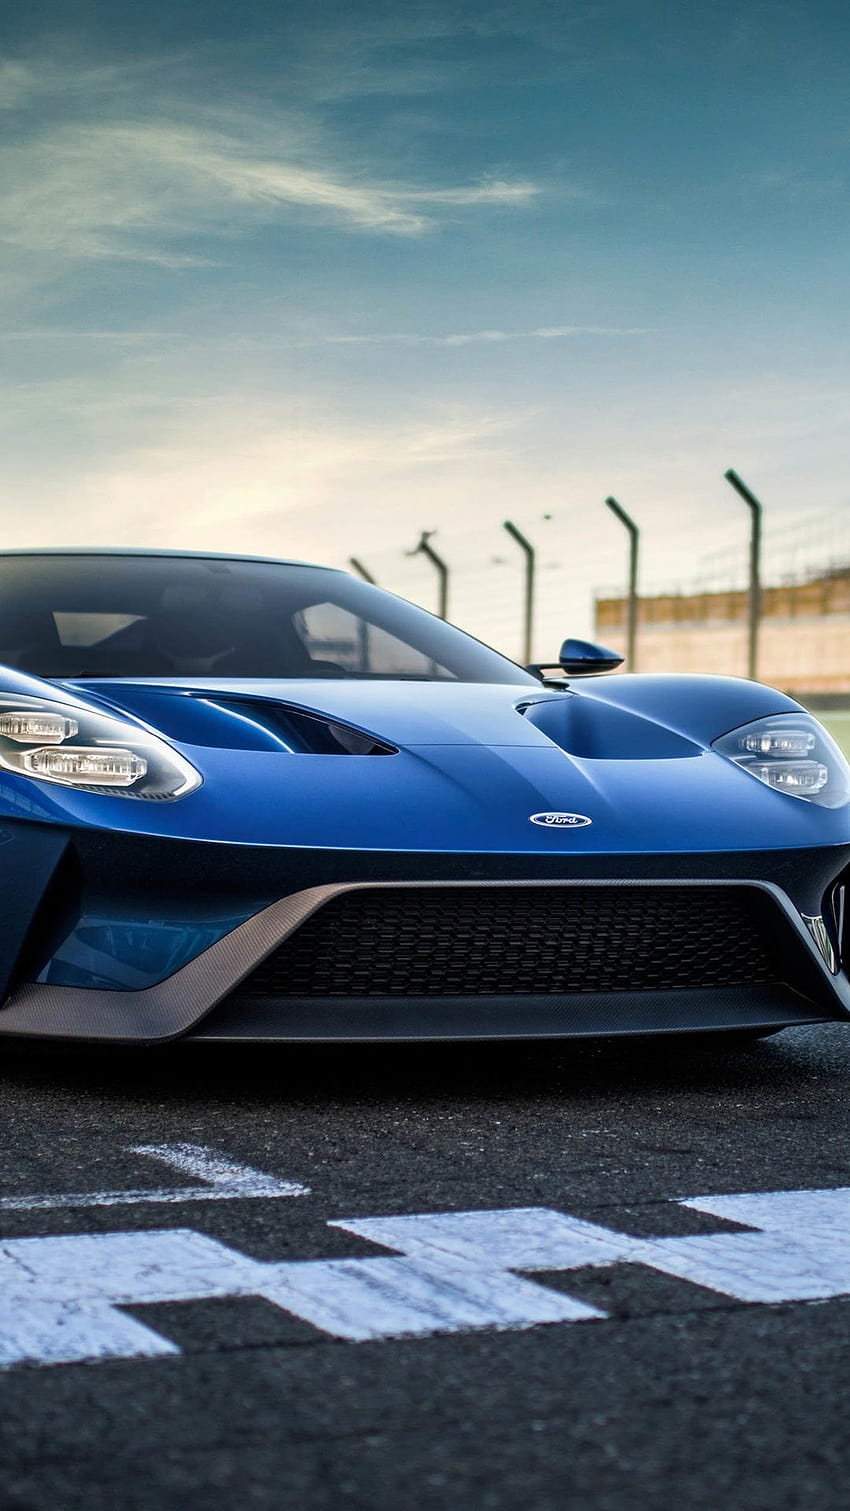 Ford GT II blue supercar front view 1080x1920 iPhone 8/7/6/6S Plus, ford gt iphone HD phone wallpaper